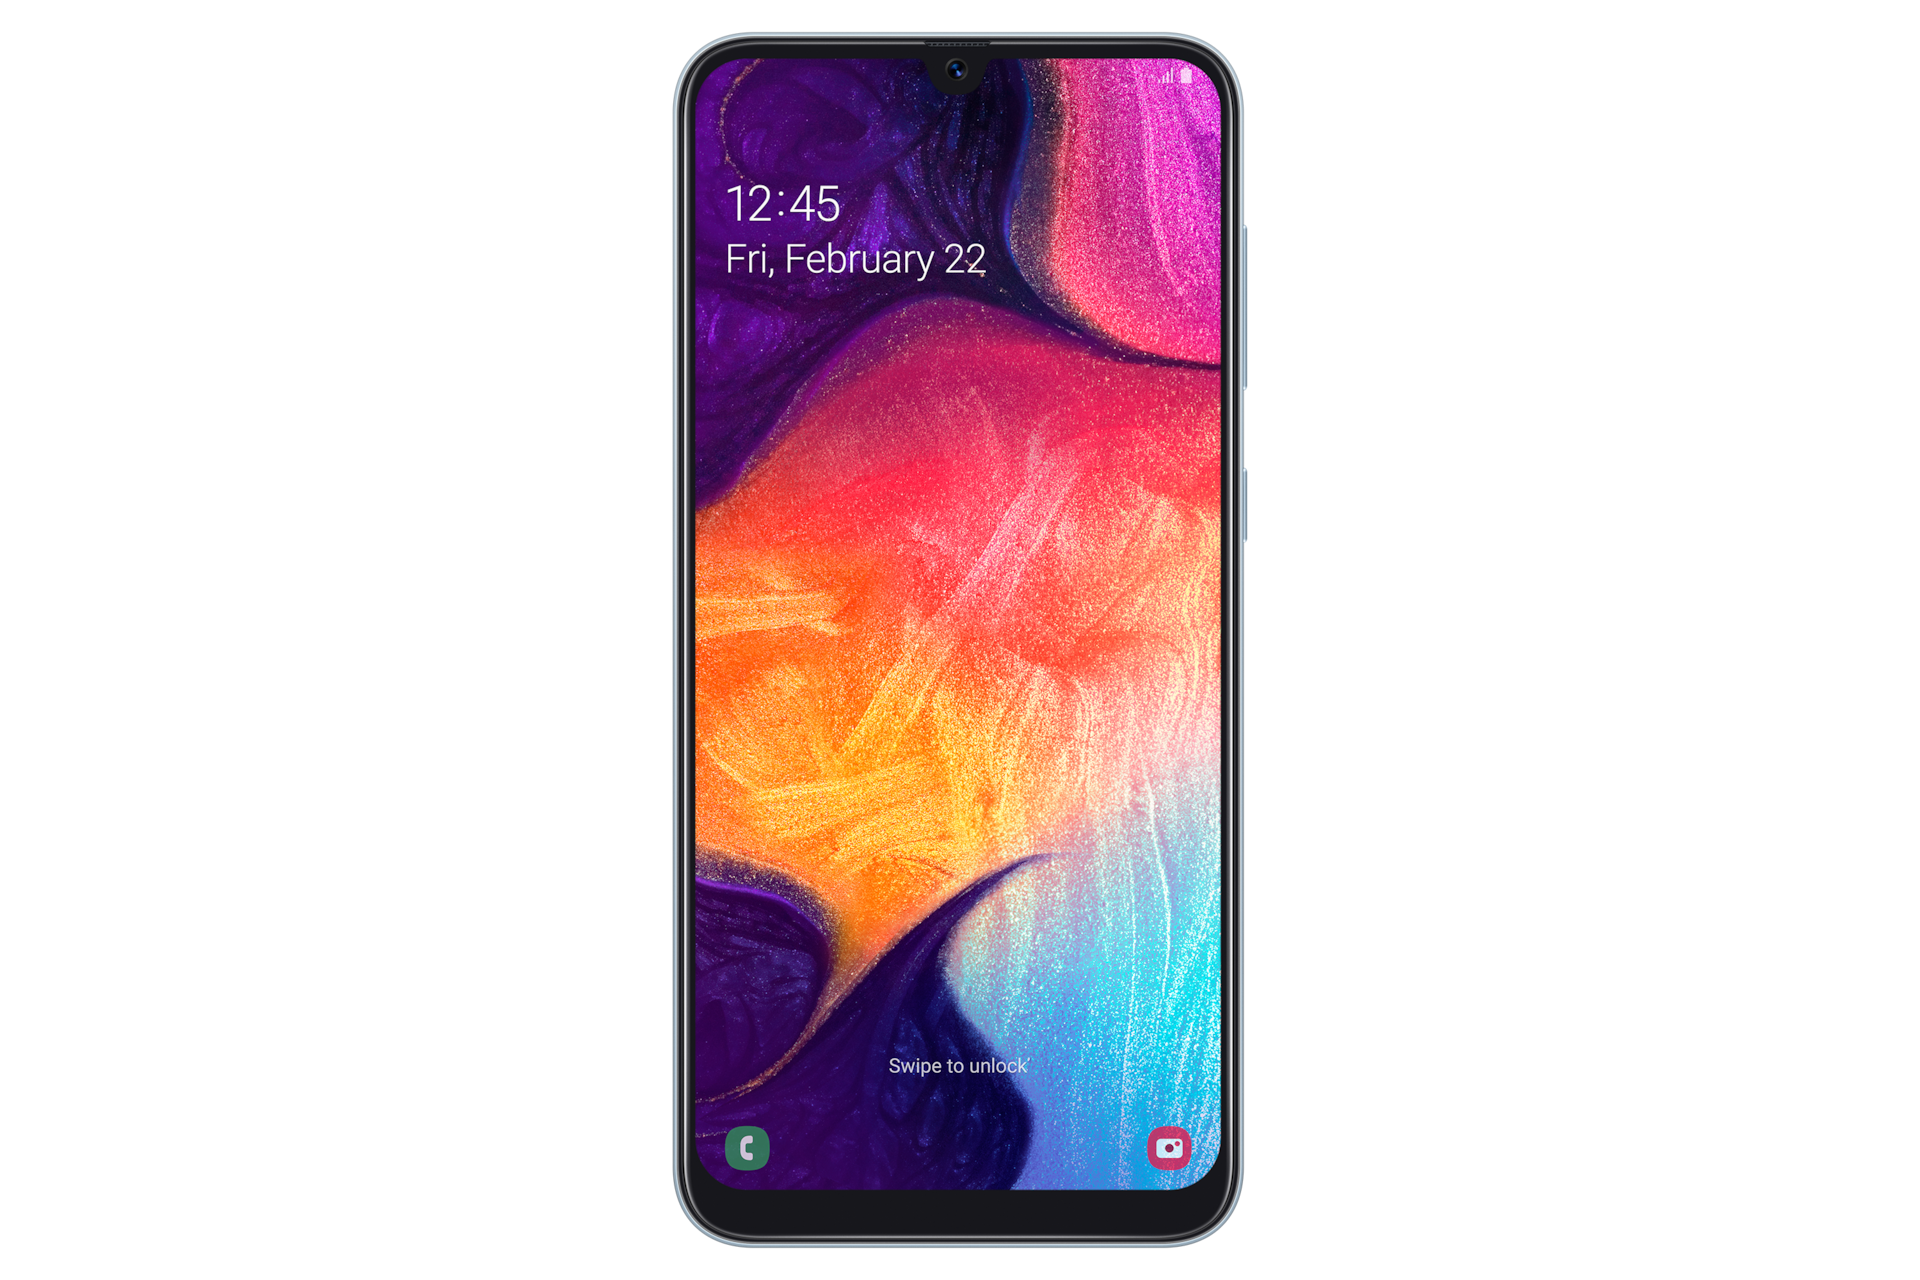 Samsung Galaxy A50 Price and availability in the